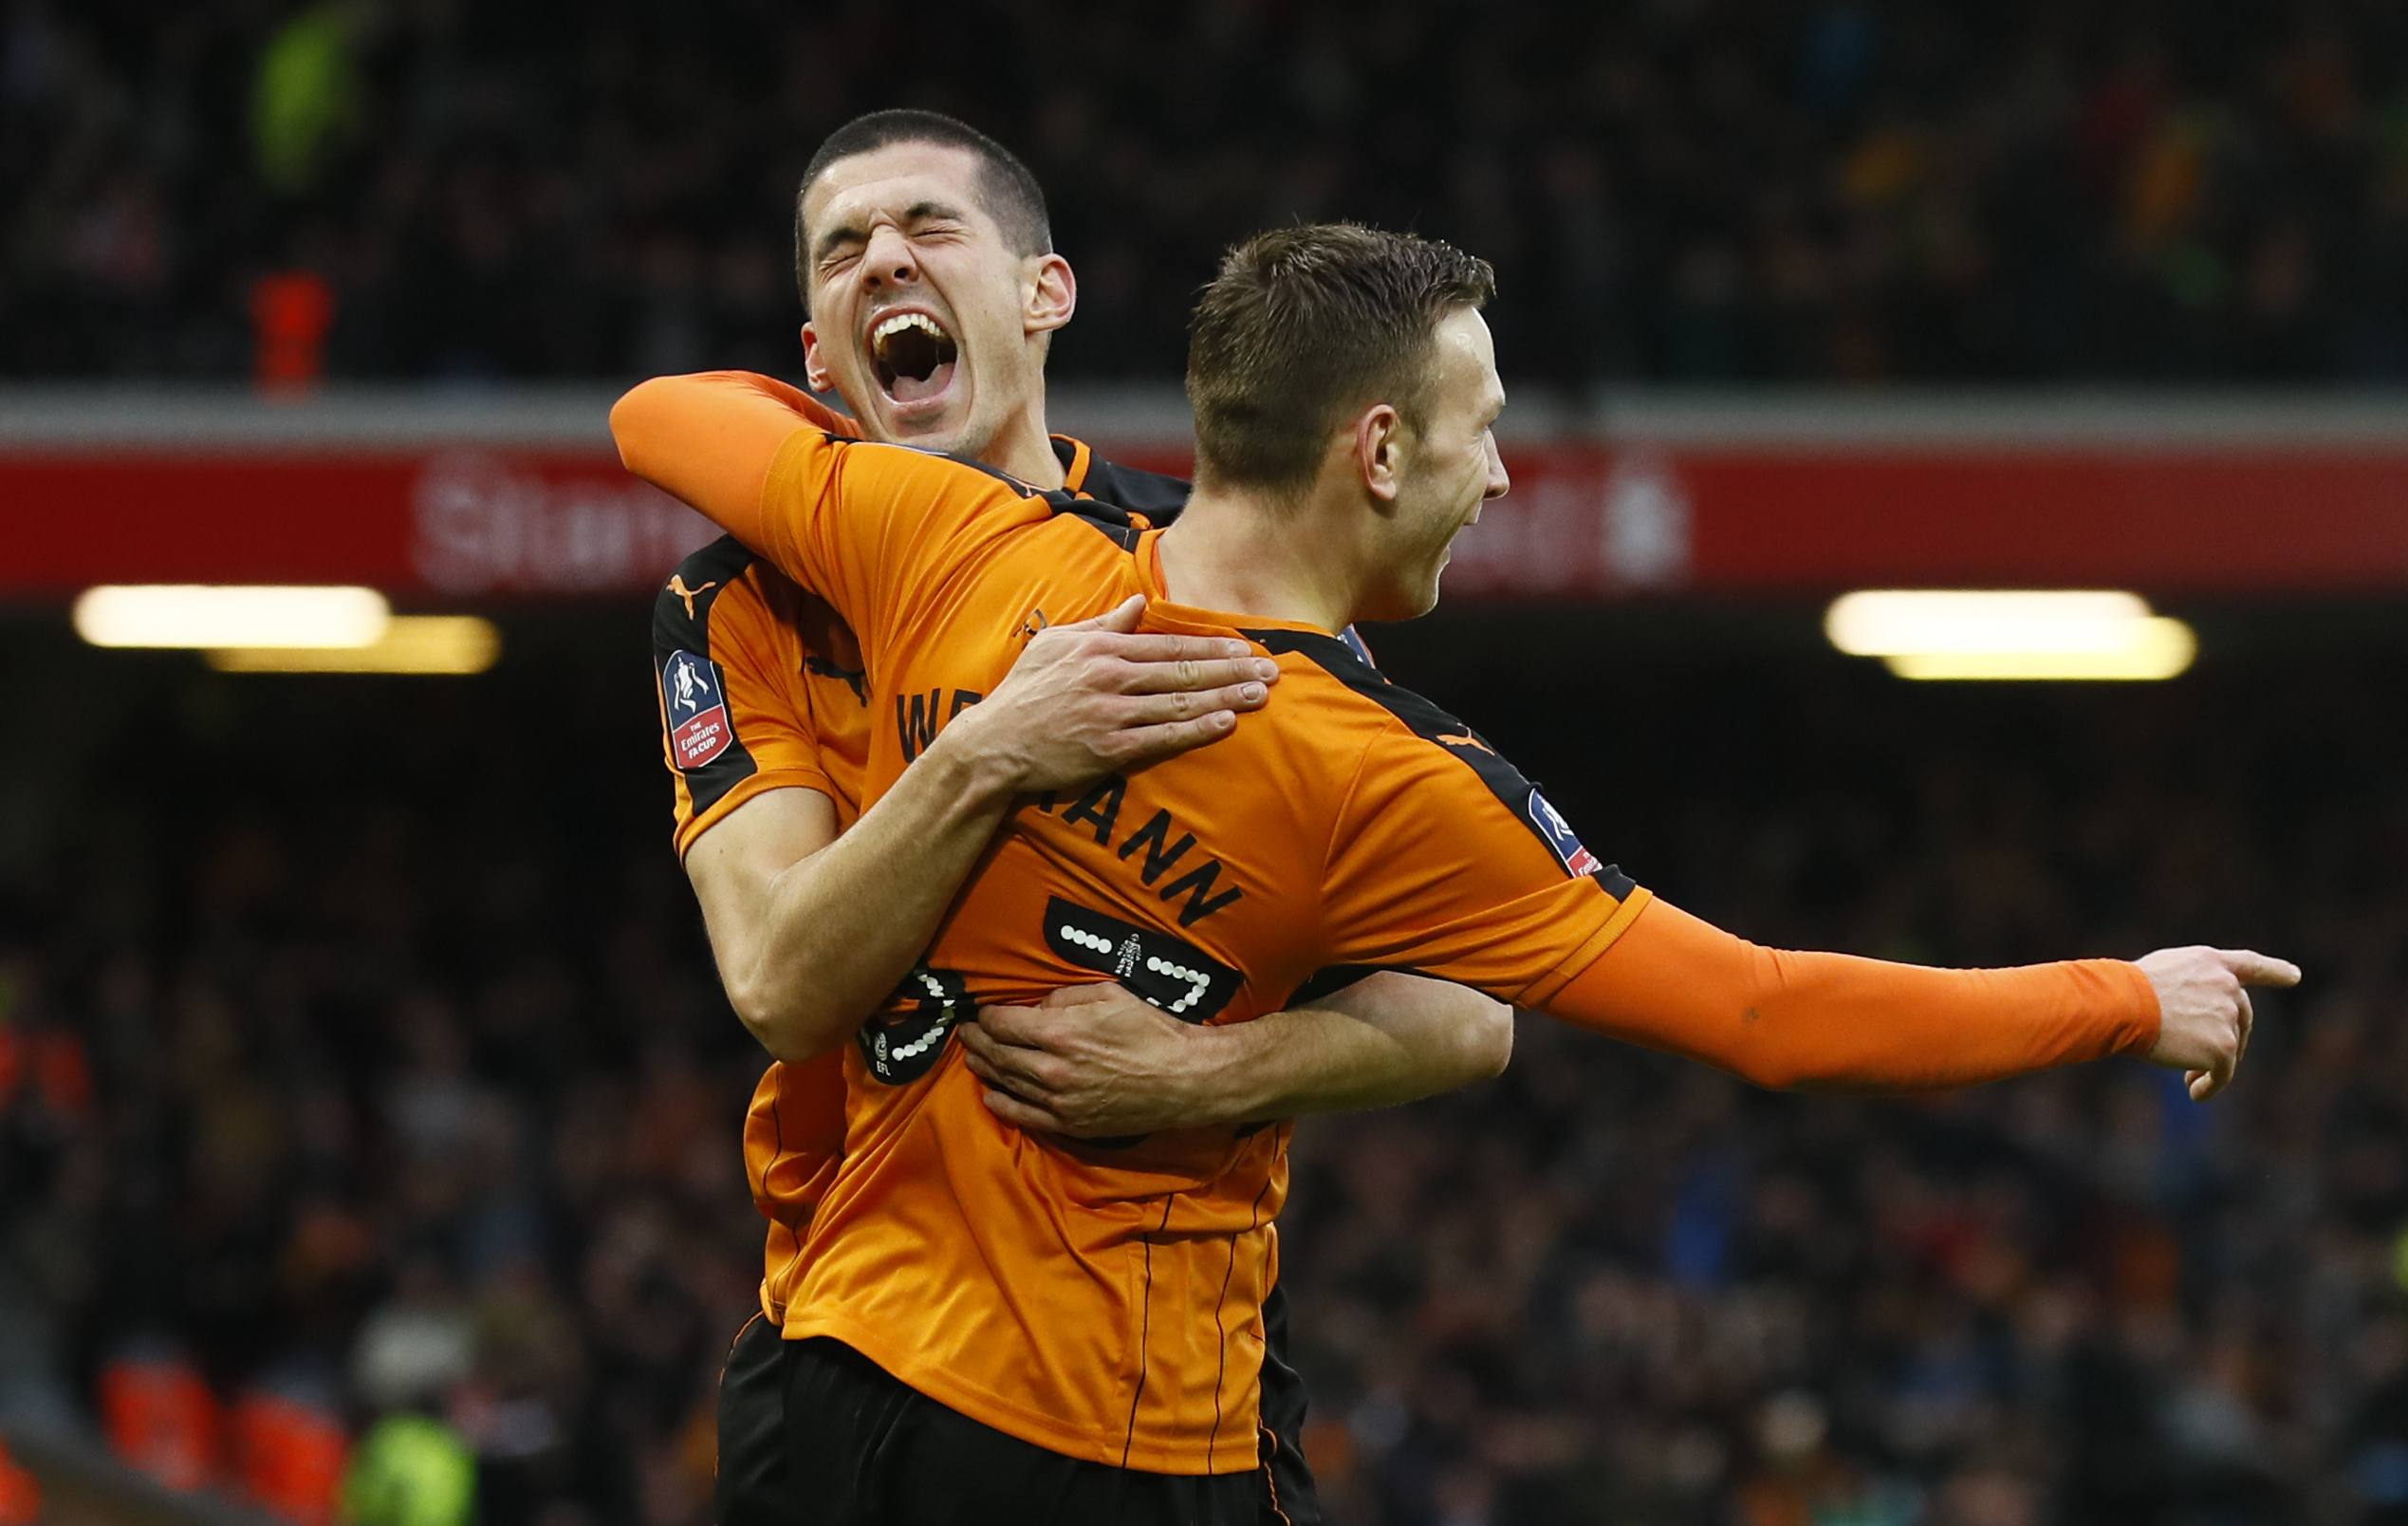 Football: Liverpool stunned by Wolves in FA Cup